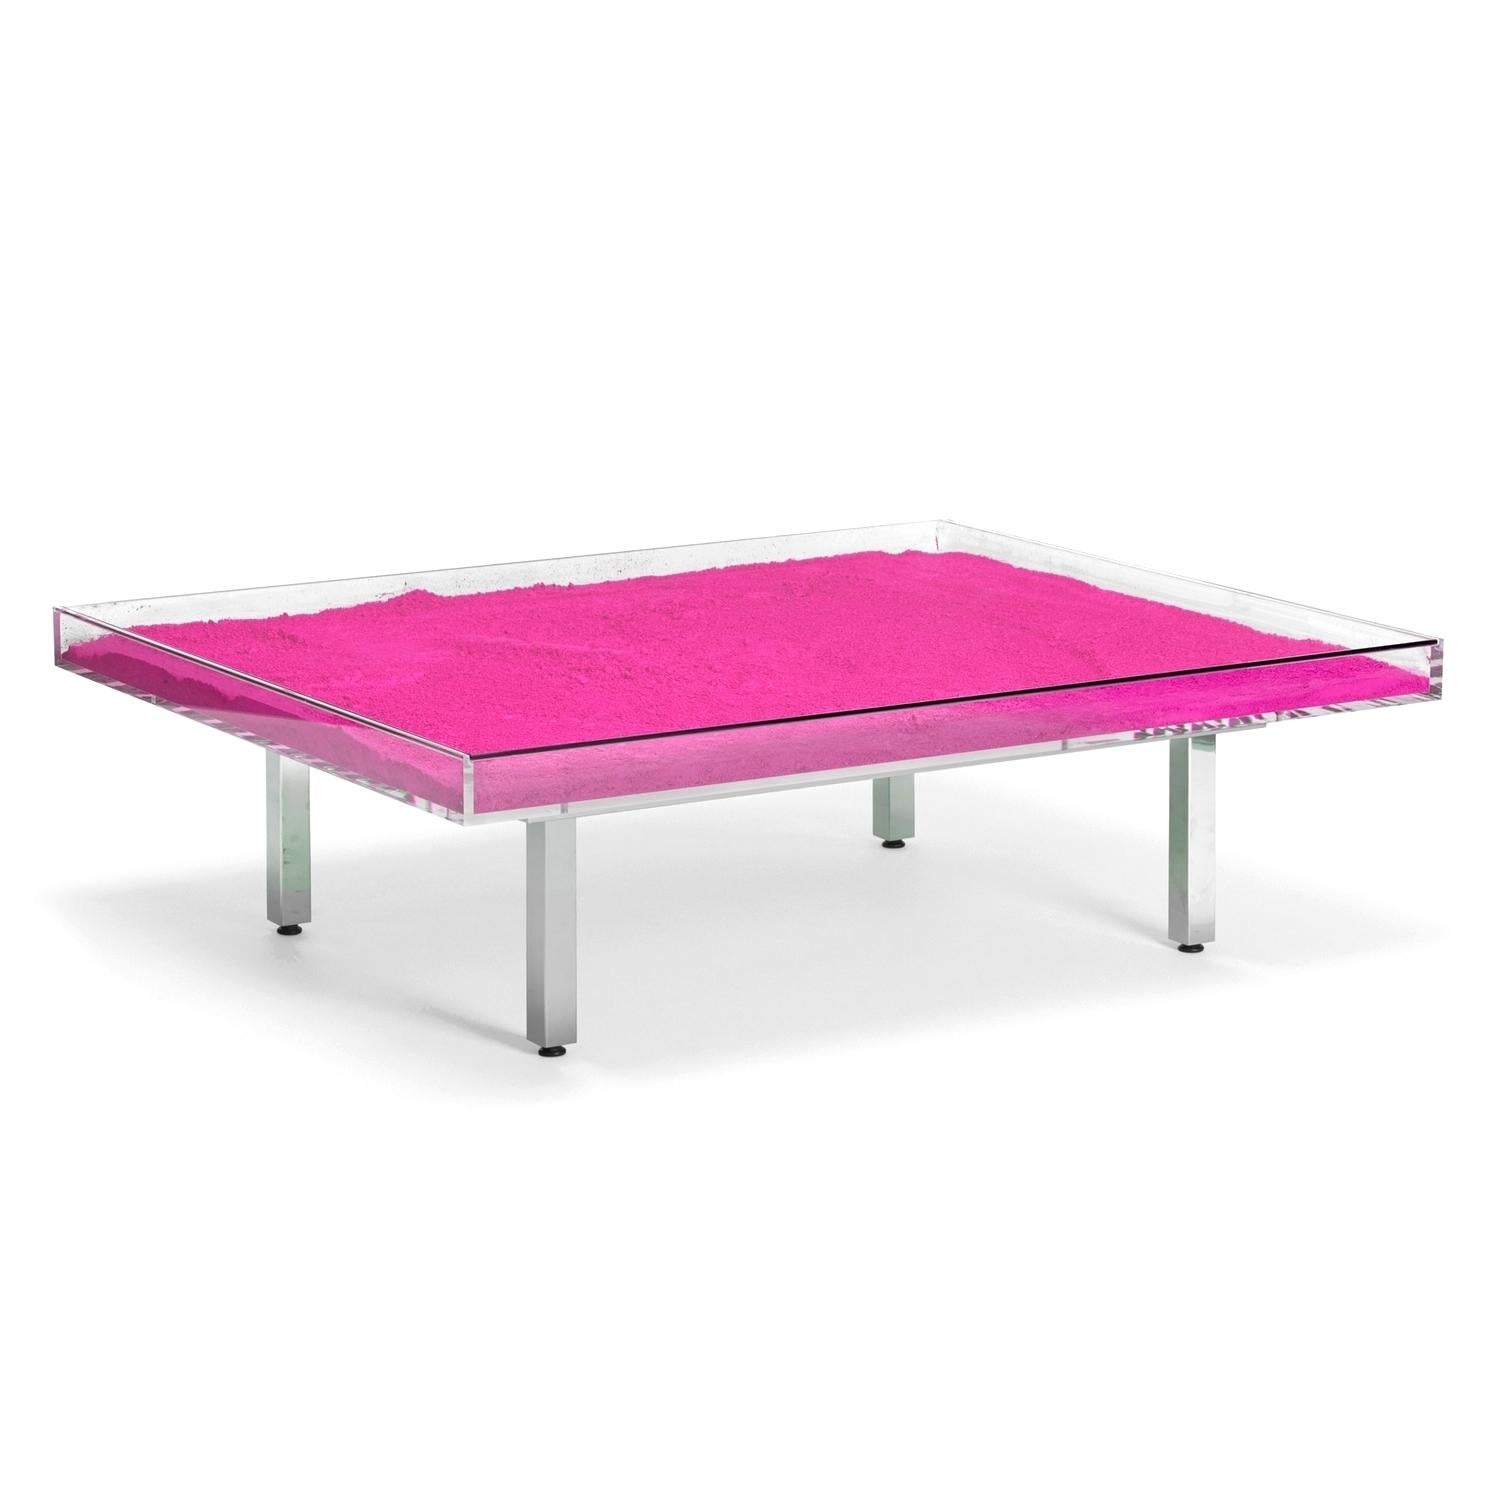 In Stock in Los Angeles, Yves Klein Pink 